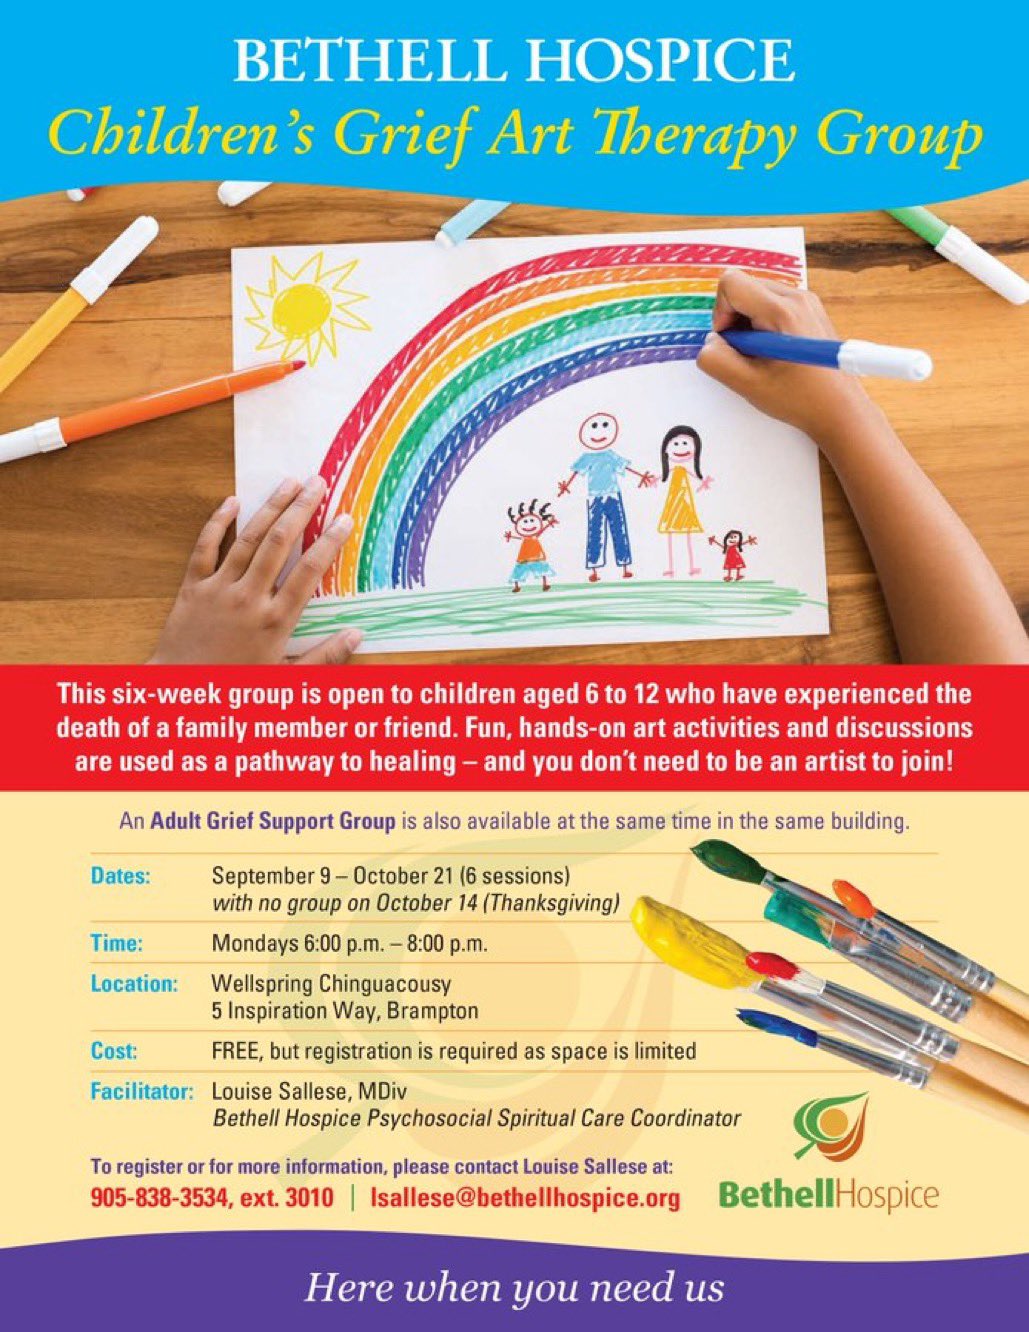 Bethellhospice Children S Art Therapy Grief Group Begins Sept 9 For Six Weeks Thanks To The Generosity Of Our Donors Registration Is At No Cost To Participants But Space Is Limited